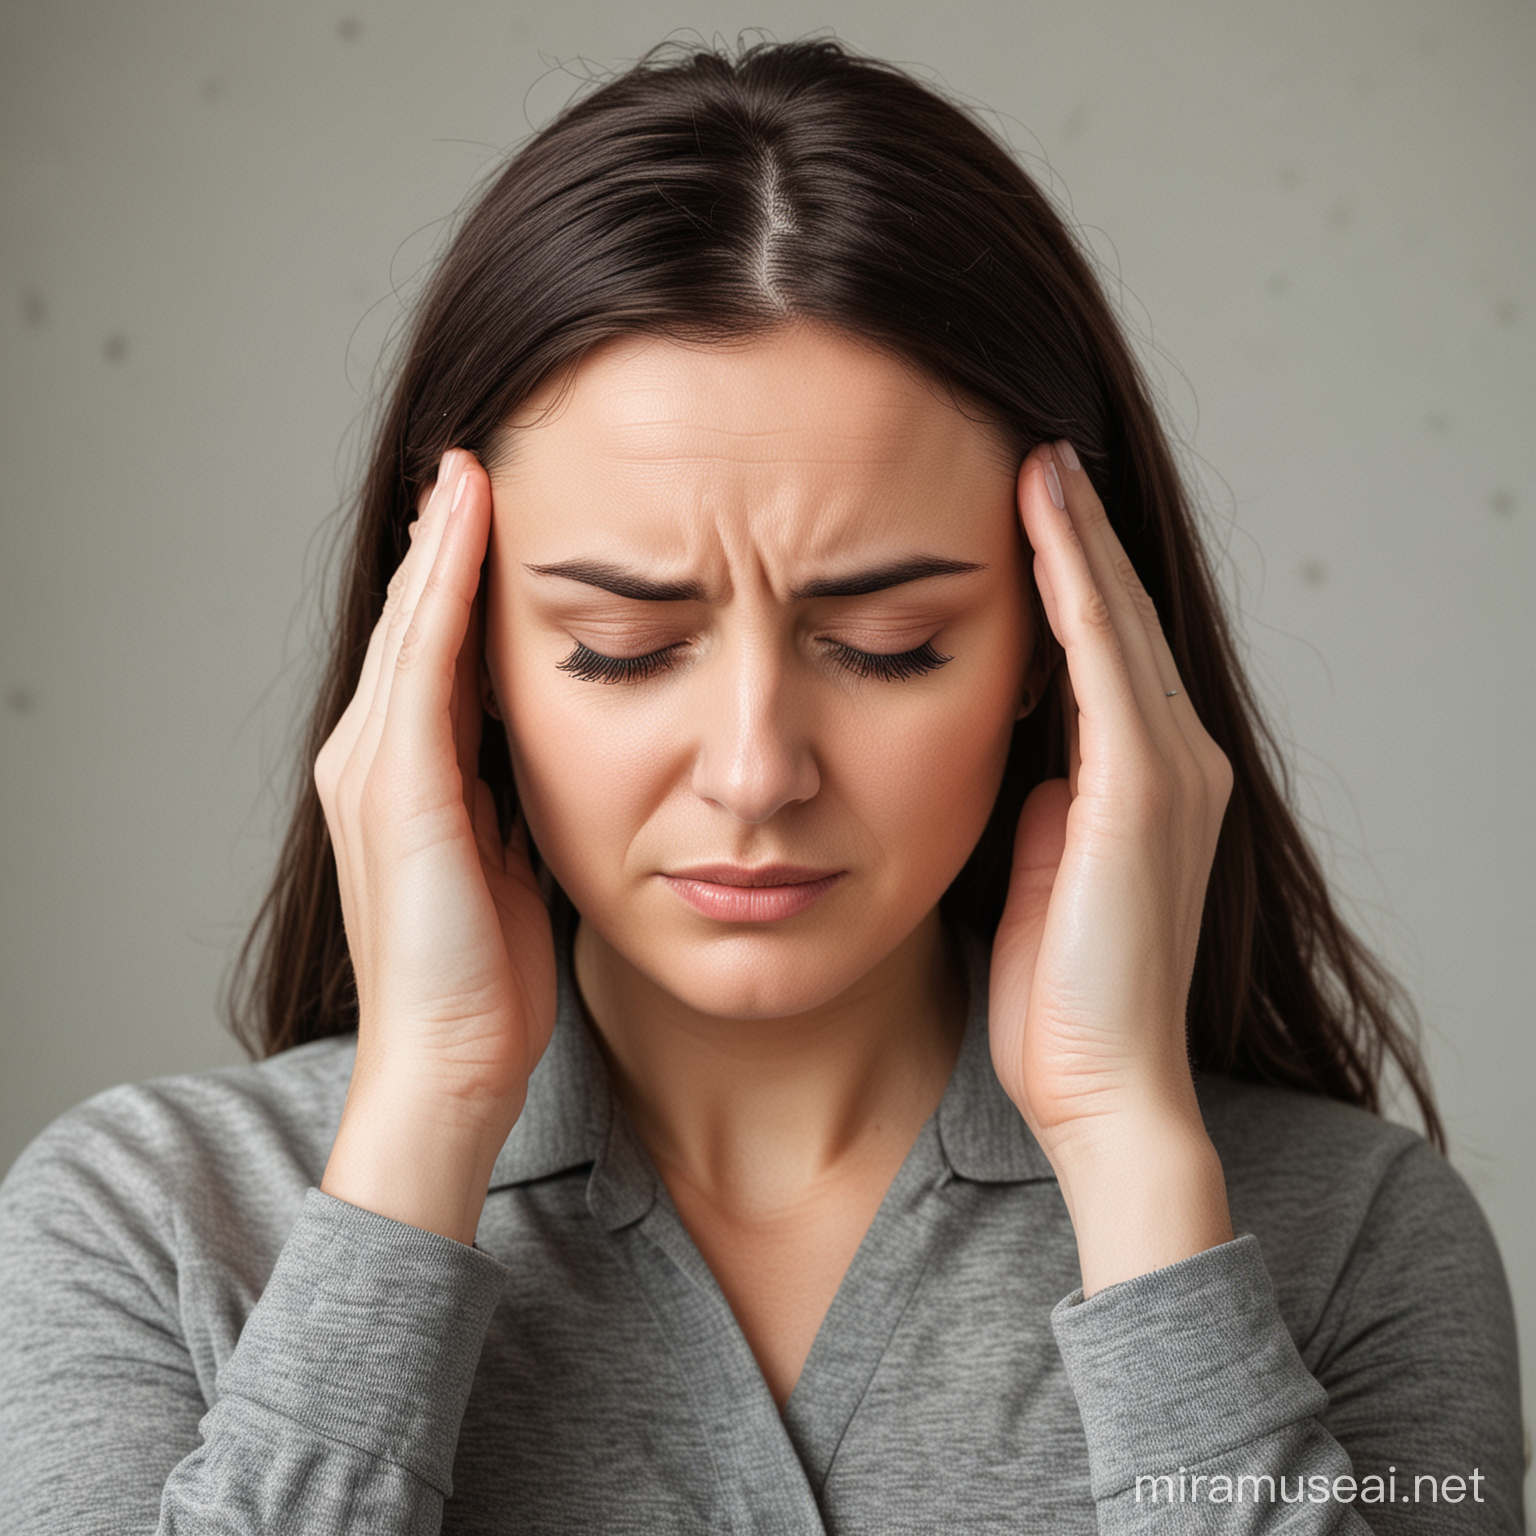 Woman Experiencing Migraine Pain Holding Head in Distress